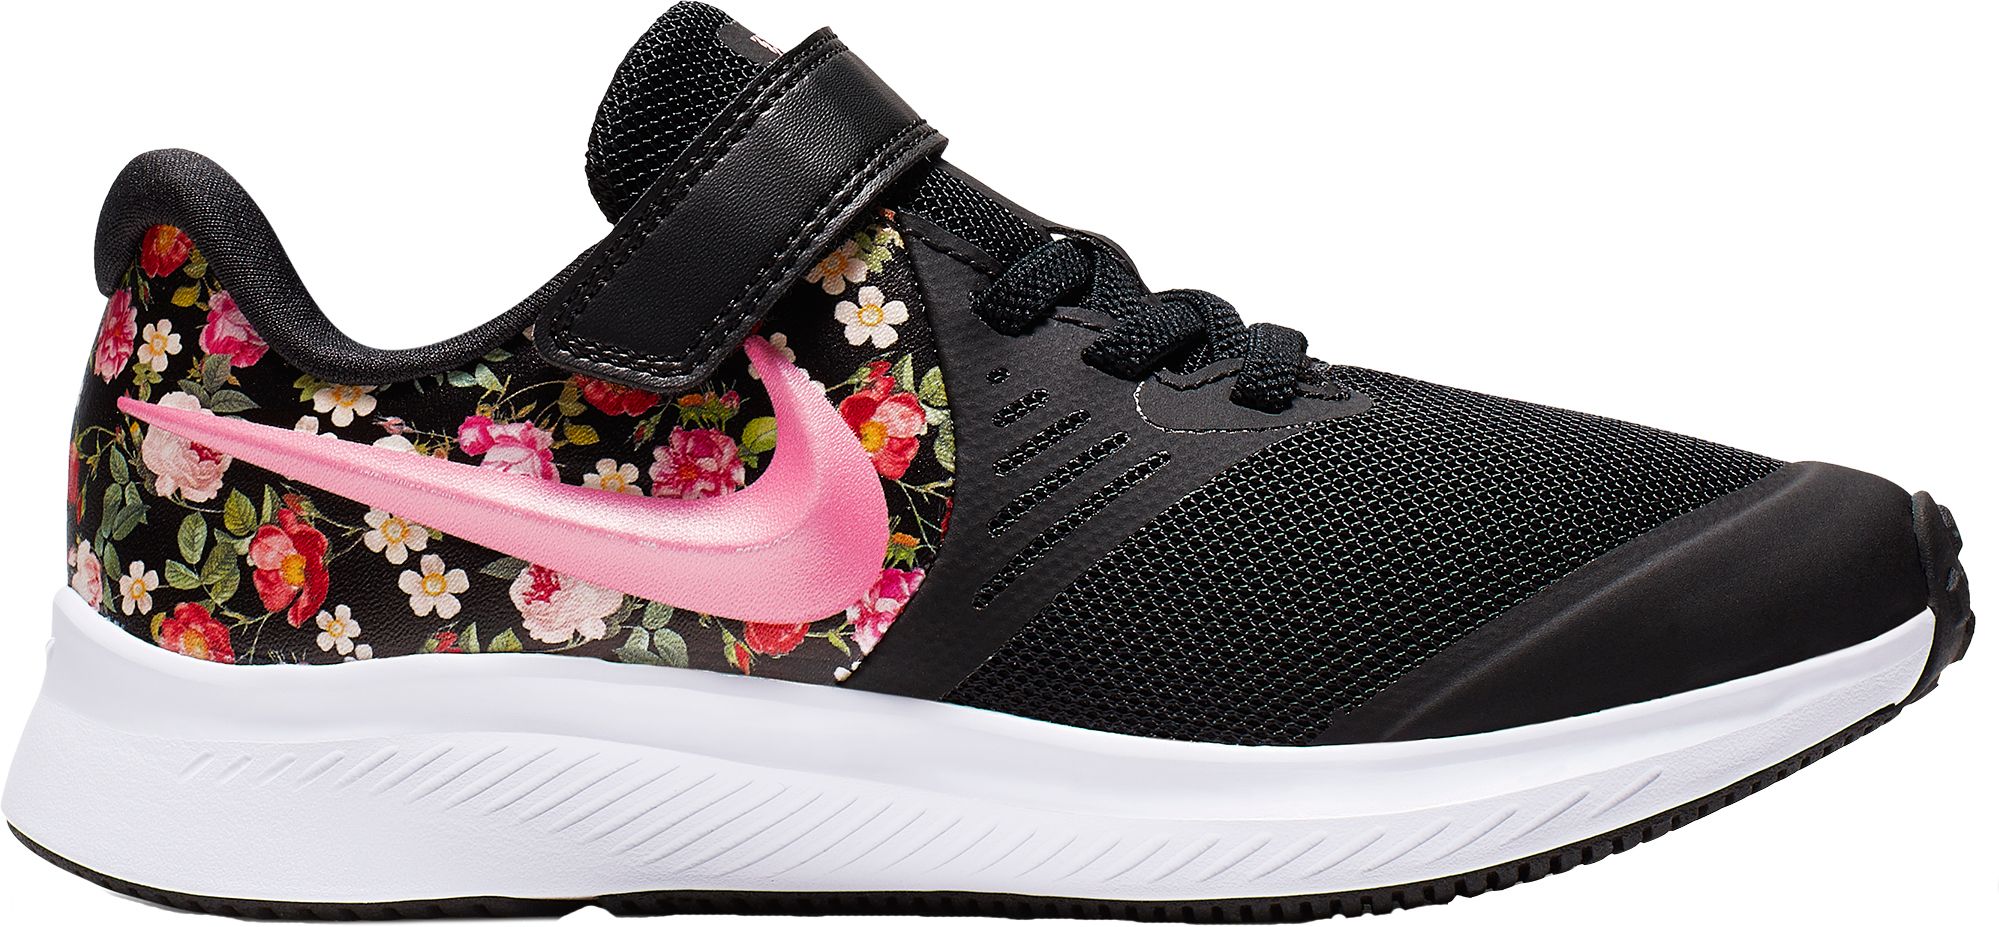 nikes with flowers on them